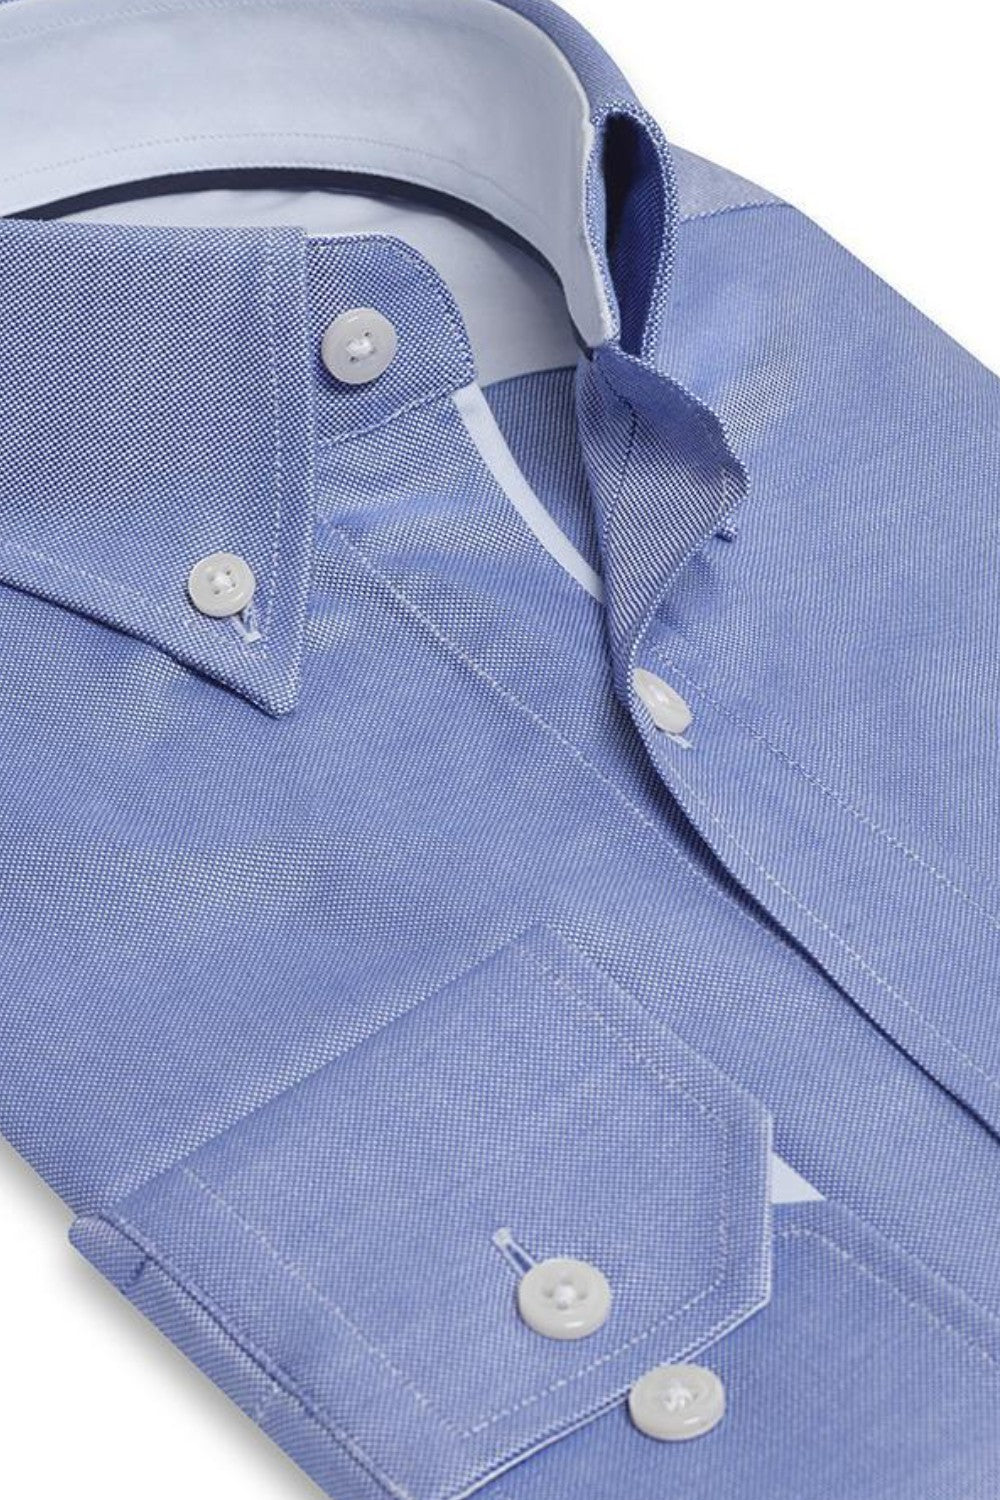 FRANKLIN BLUE BUTTON DOWN DRESS SHIRT - CASUAL /FORMAL EVENT - SIDE VIEW